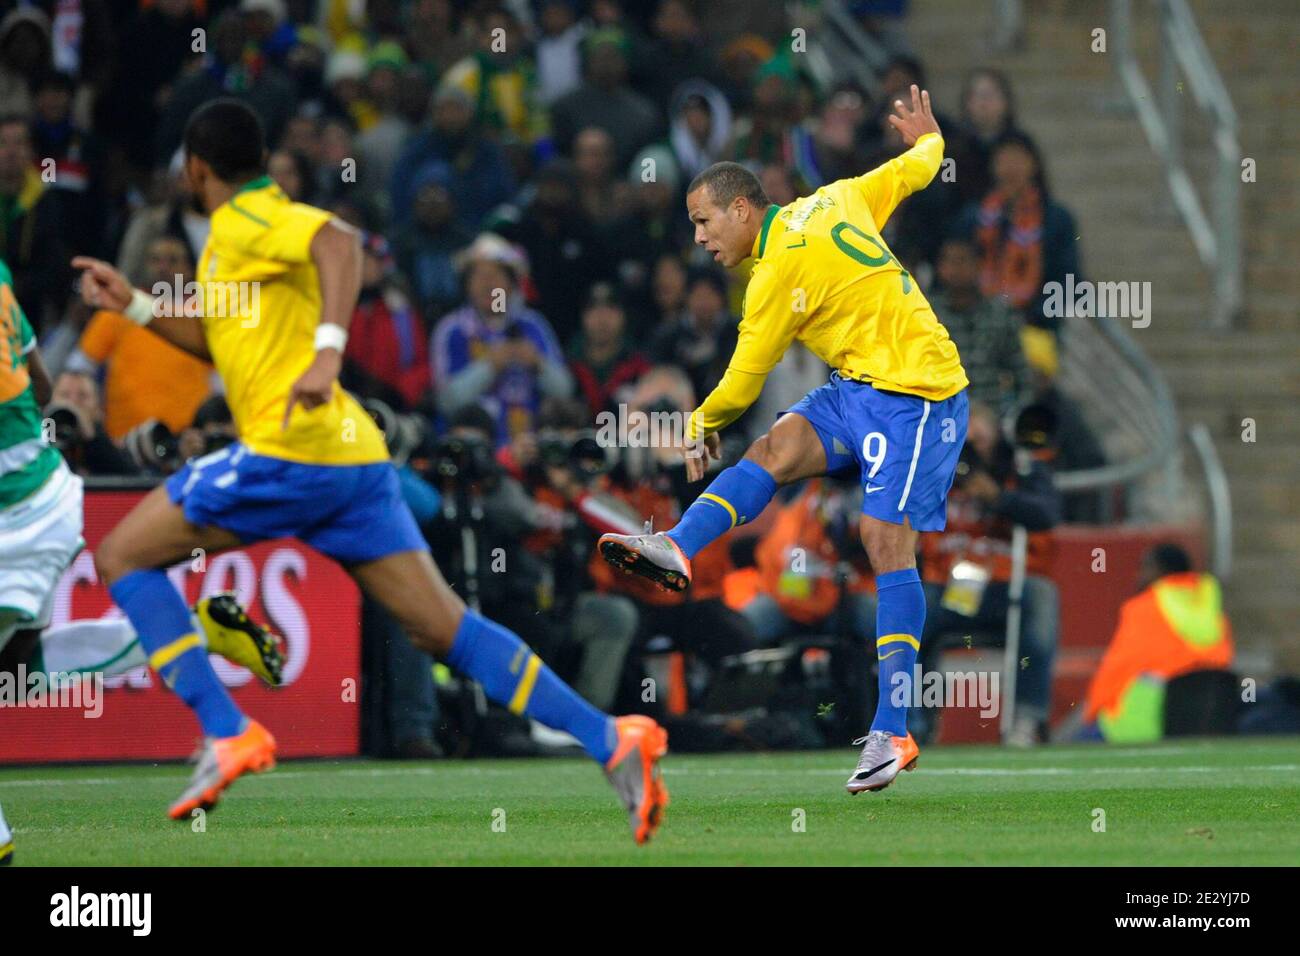 Brazil's Luis Fabiano scoring the 1-0 goal during the 2010 FIFA World Cup South Africa Soccer match, group G, Brazil vs Ivory Coast at Soccer City football stadium in Johannesburg, South Africa on June 20, 2010. Brazil won 3-1. Photo by Henri Szwarc/ABACAPRESS.COM Stock Photo